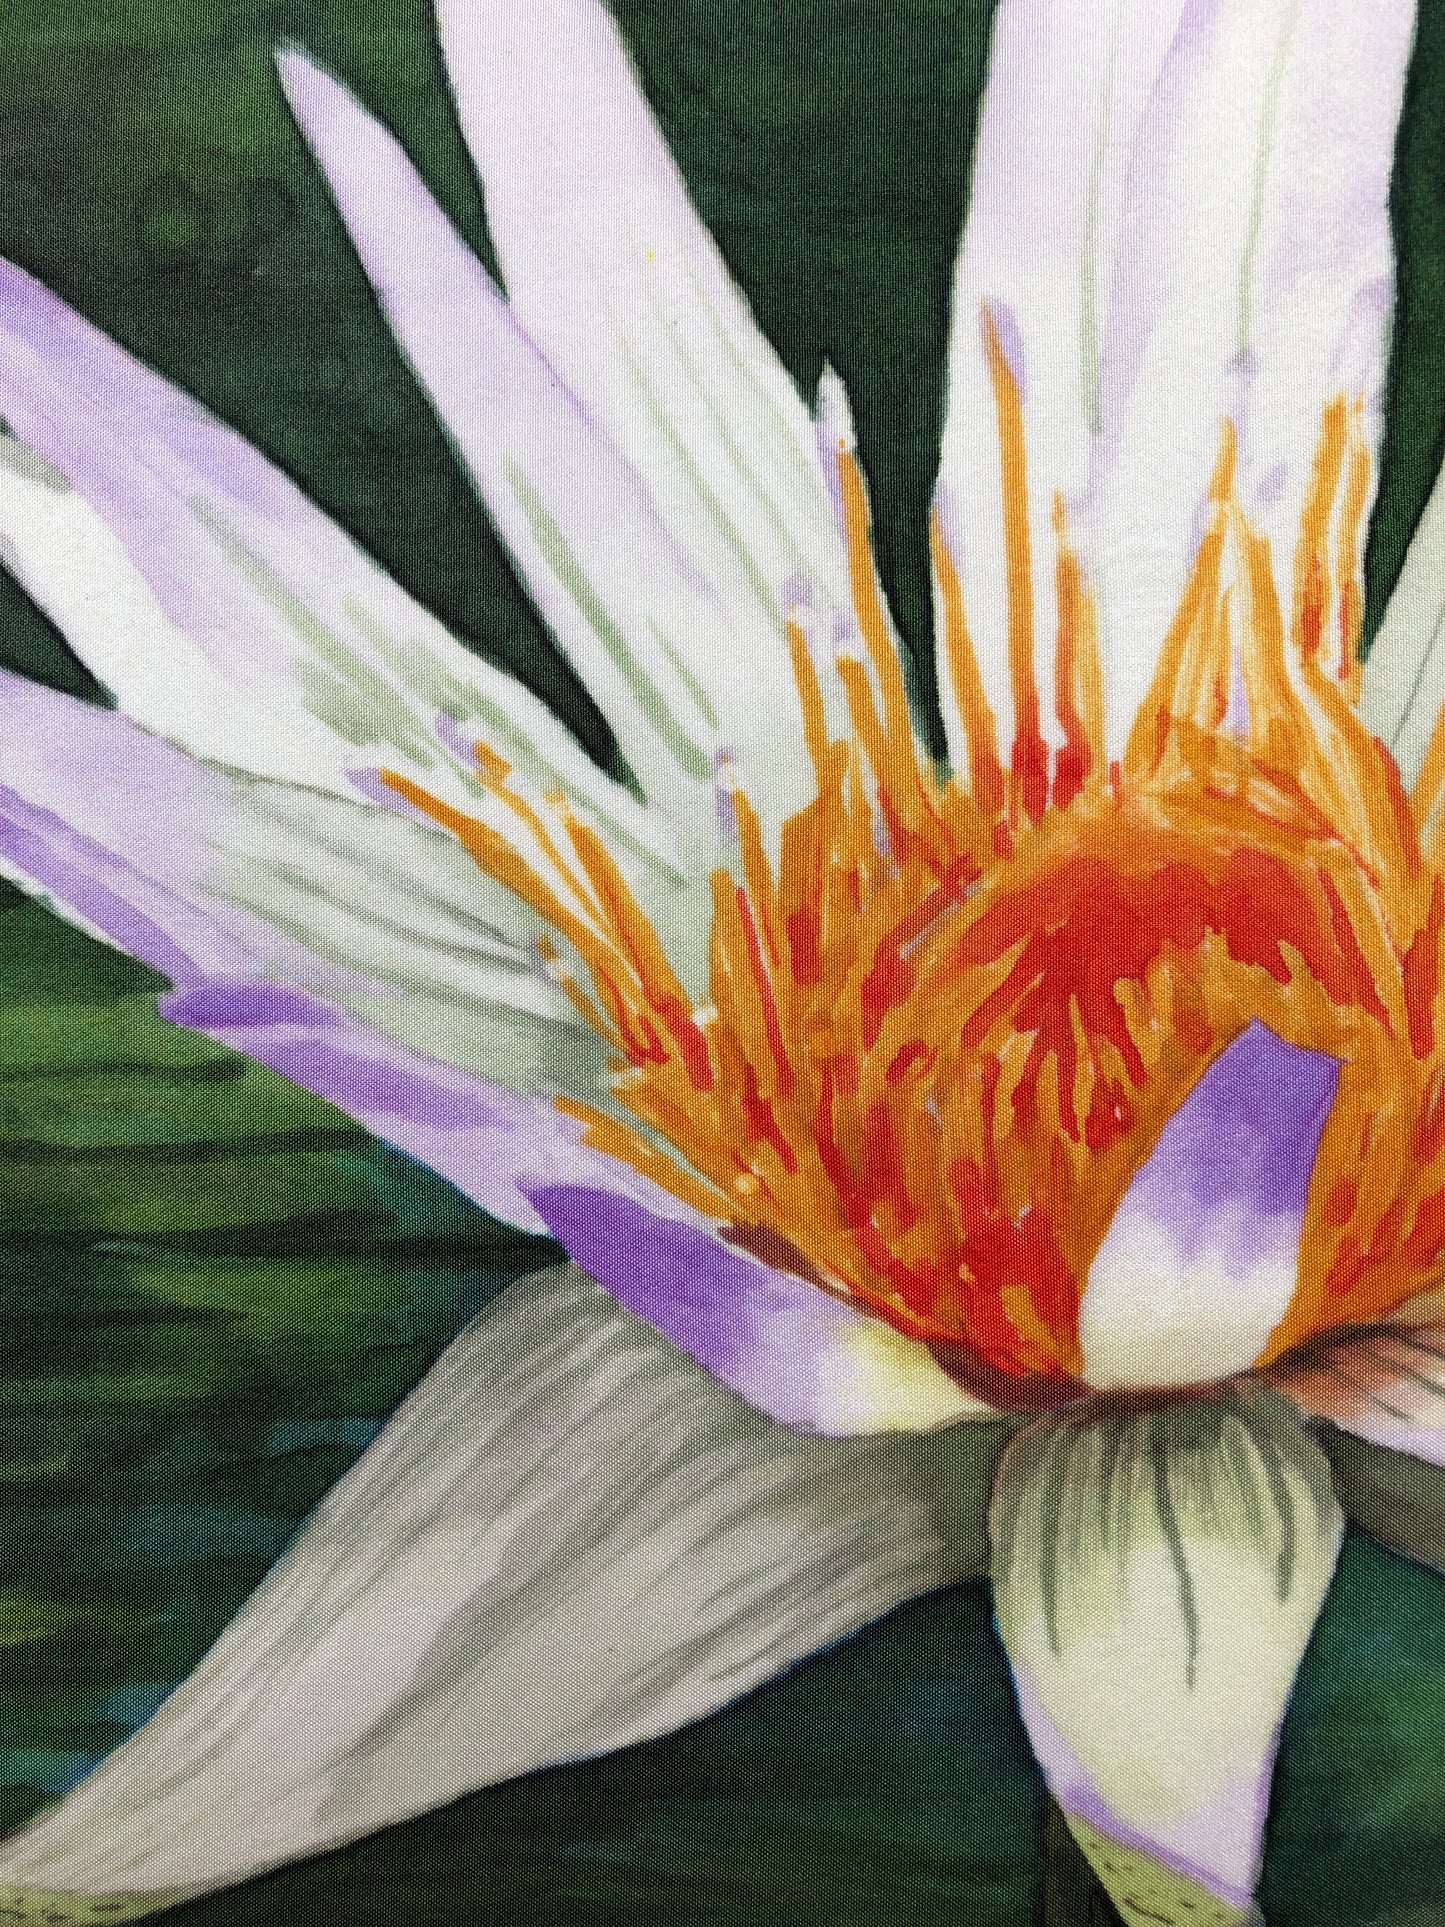 “Water Lily” - Painting on Silk - SOLD